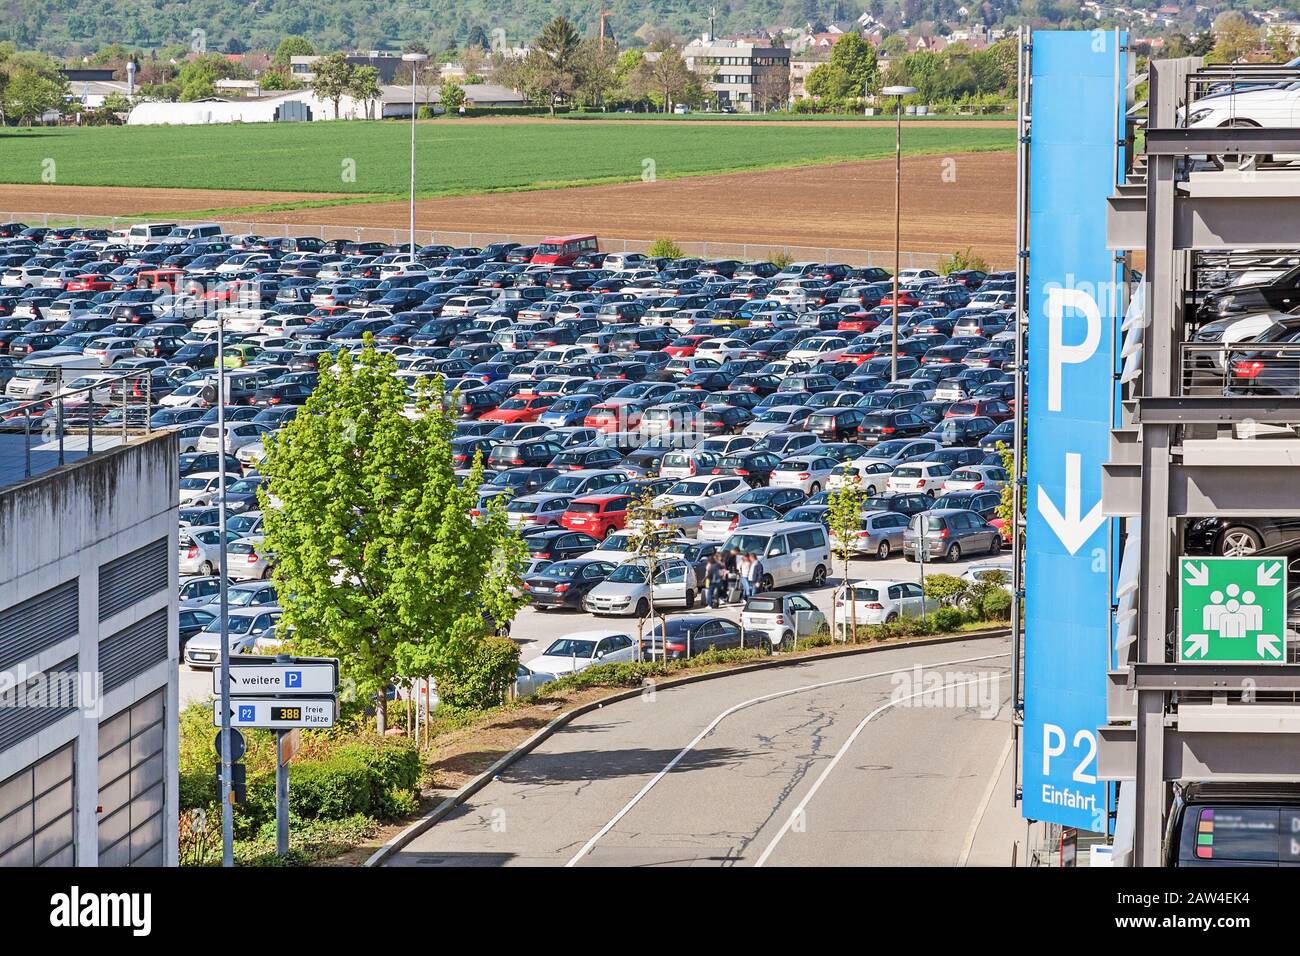 Airport parking lot with cars - parking garage with P sign aside Stock Photo